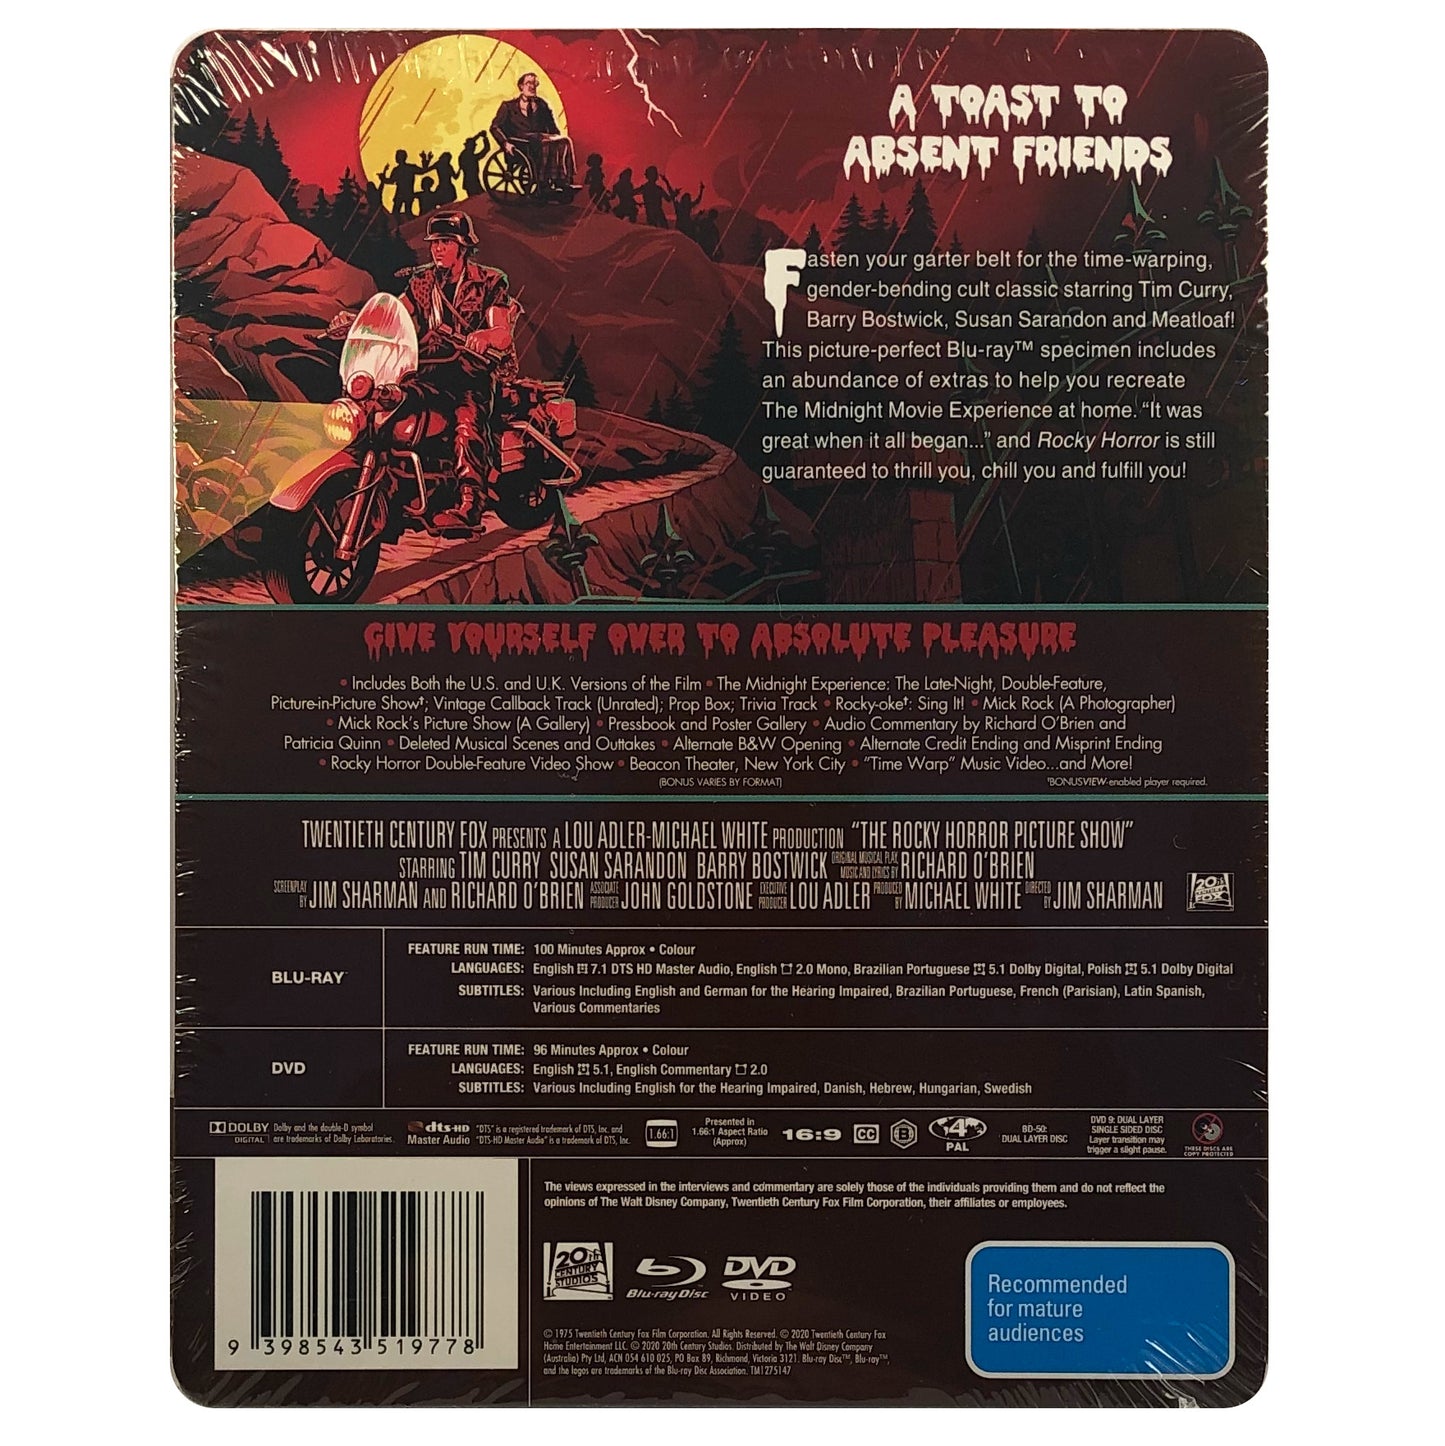 The Rocky Horror Picture Show Steelbook Blu-Ray